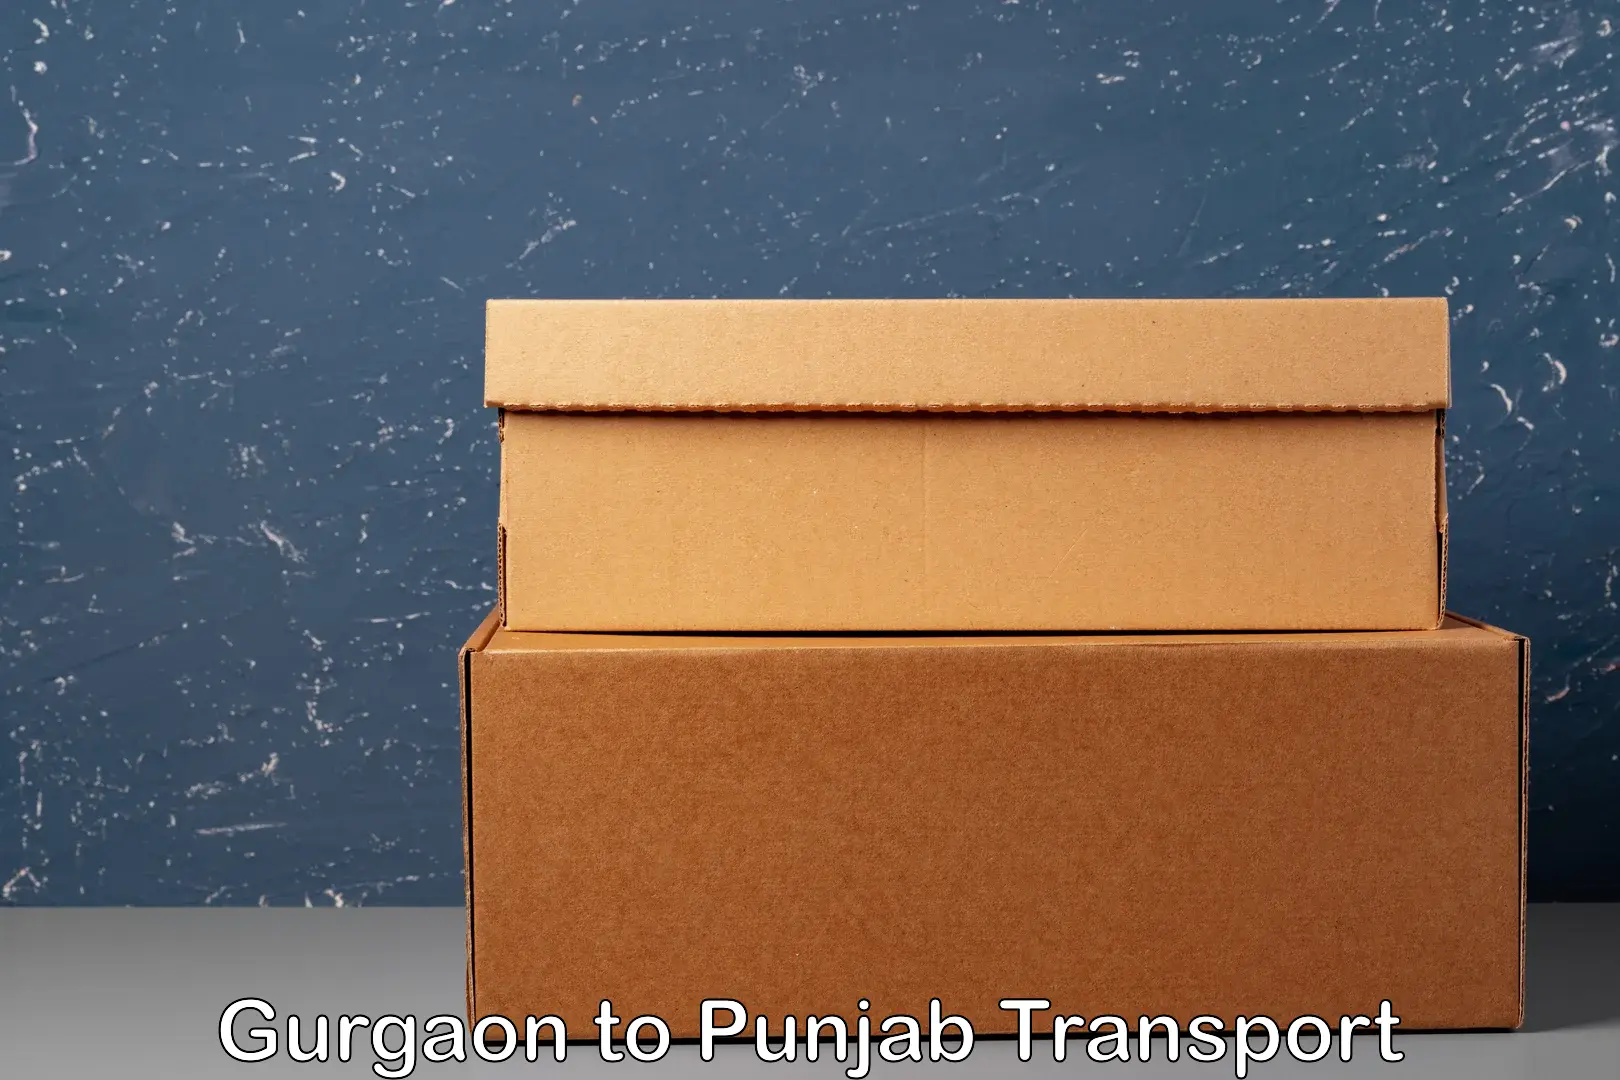 Goods delivery service Gurgaon to Punjab